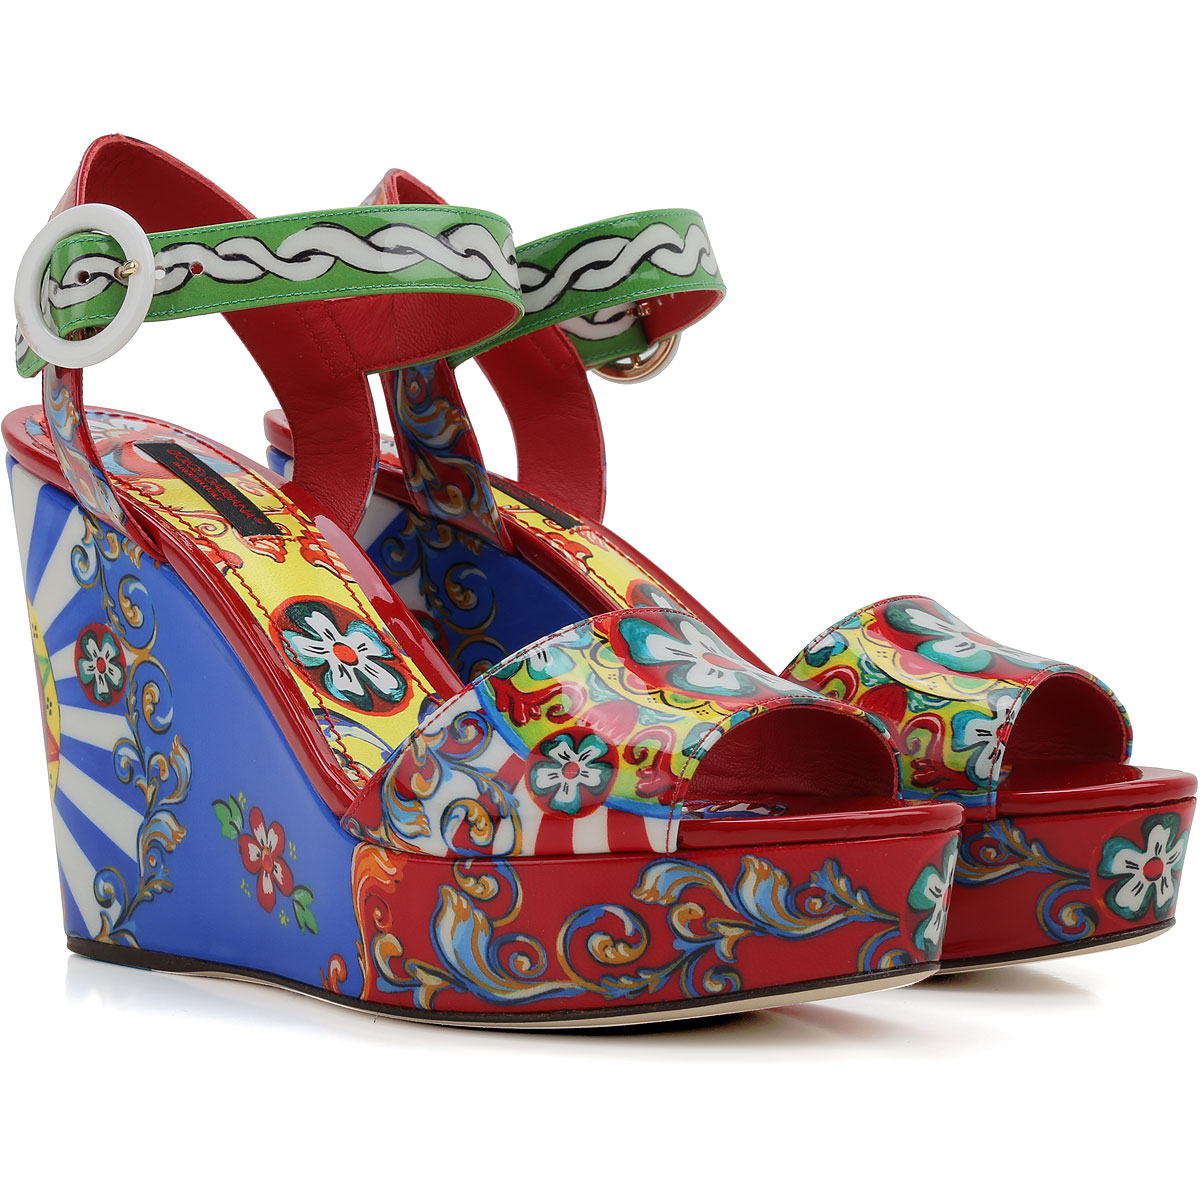 Womens Shoes Dolce & Gabbana, Style code: cz0074-ab044-8s643